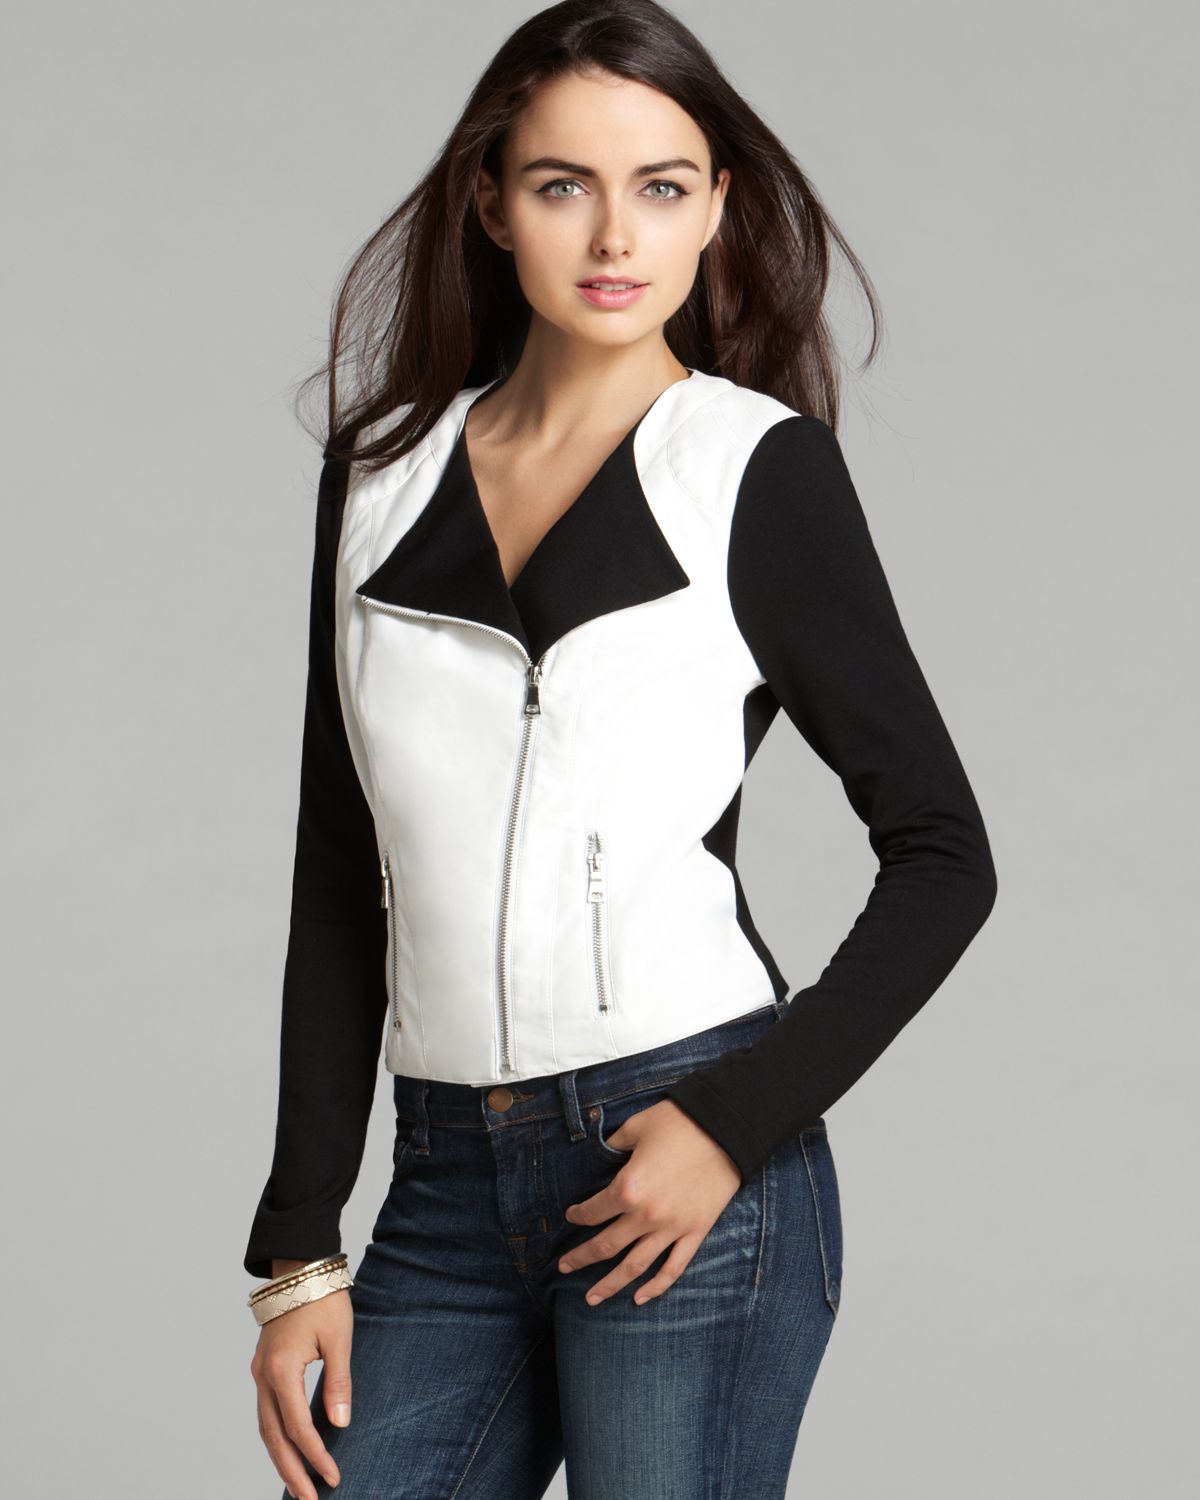 guess black and white leather jacket